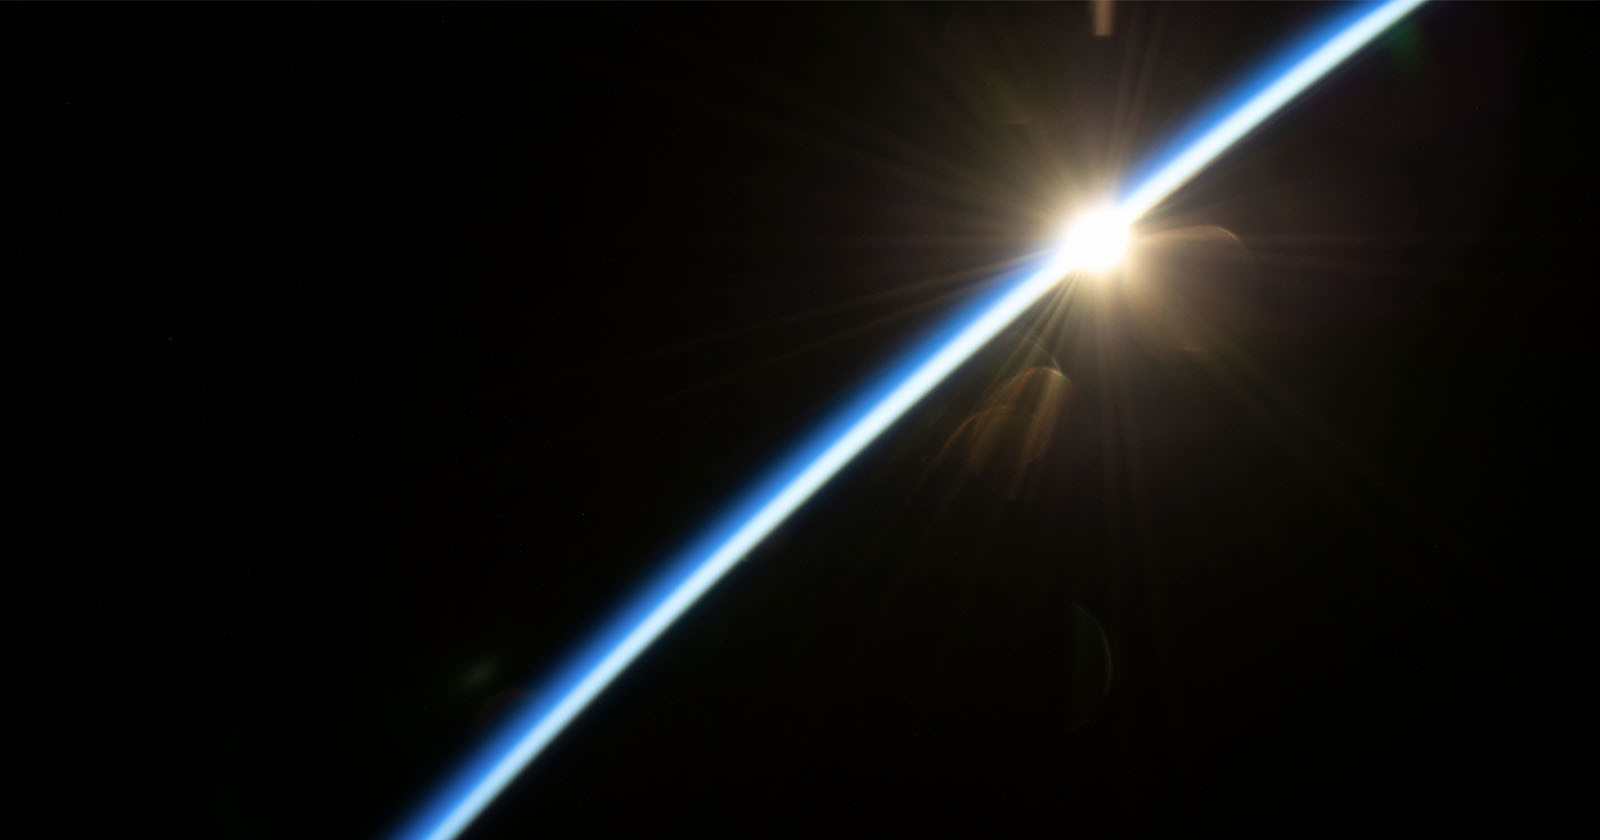 Gorgeous Orbital Sunrise Captured from the International Space Station